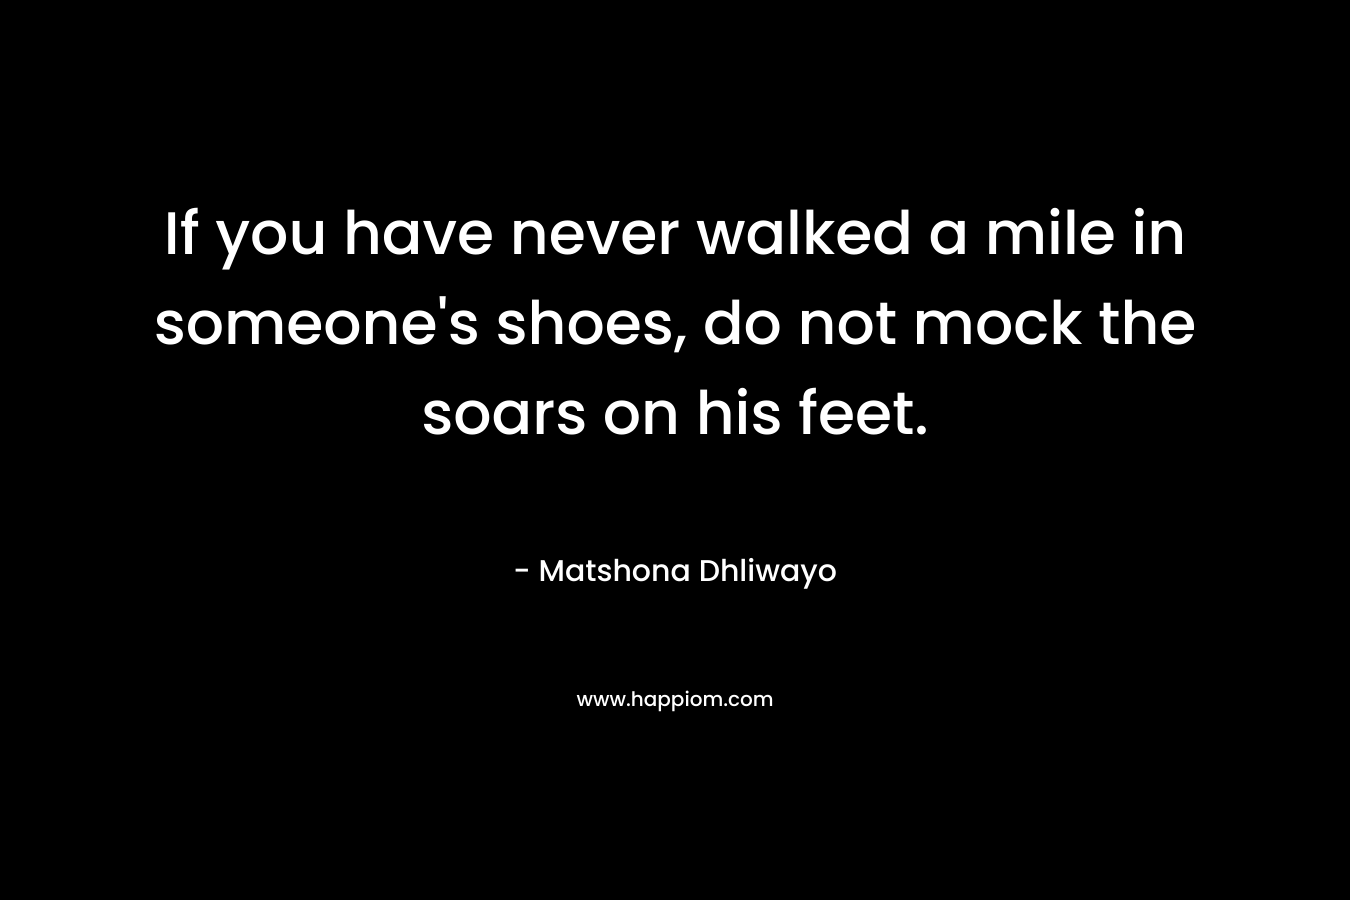 If you have never walked a mile in someone's shoes, do not mock the soars on his feet.